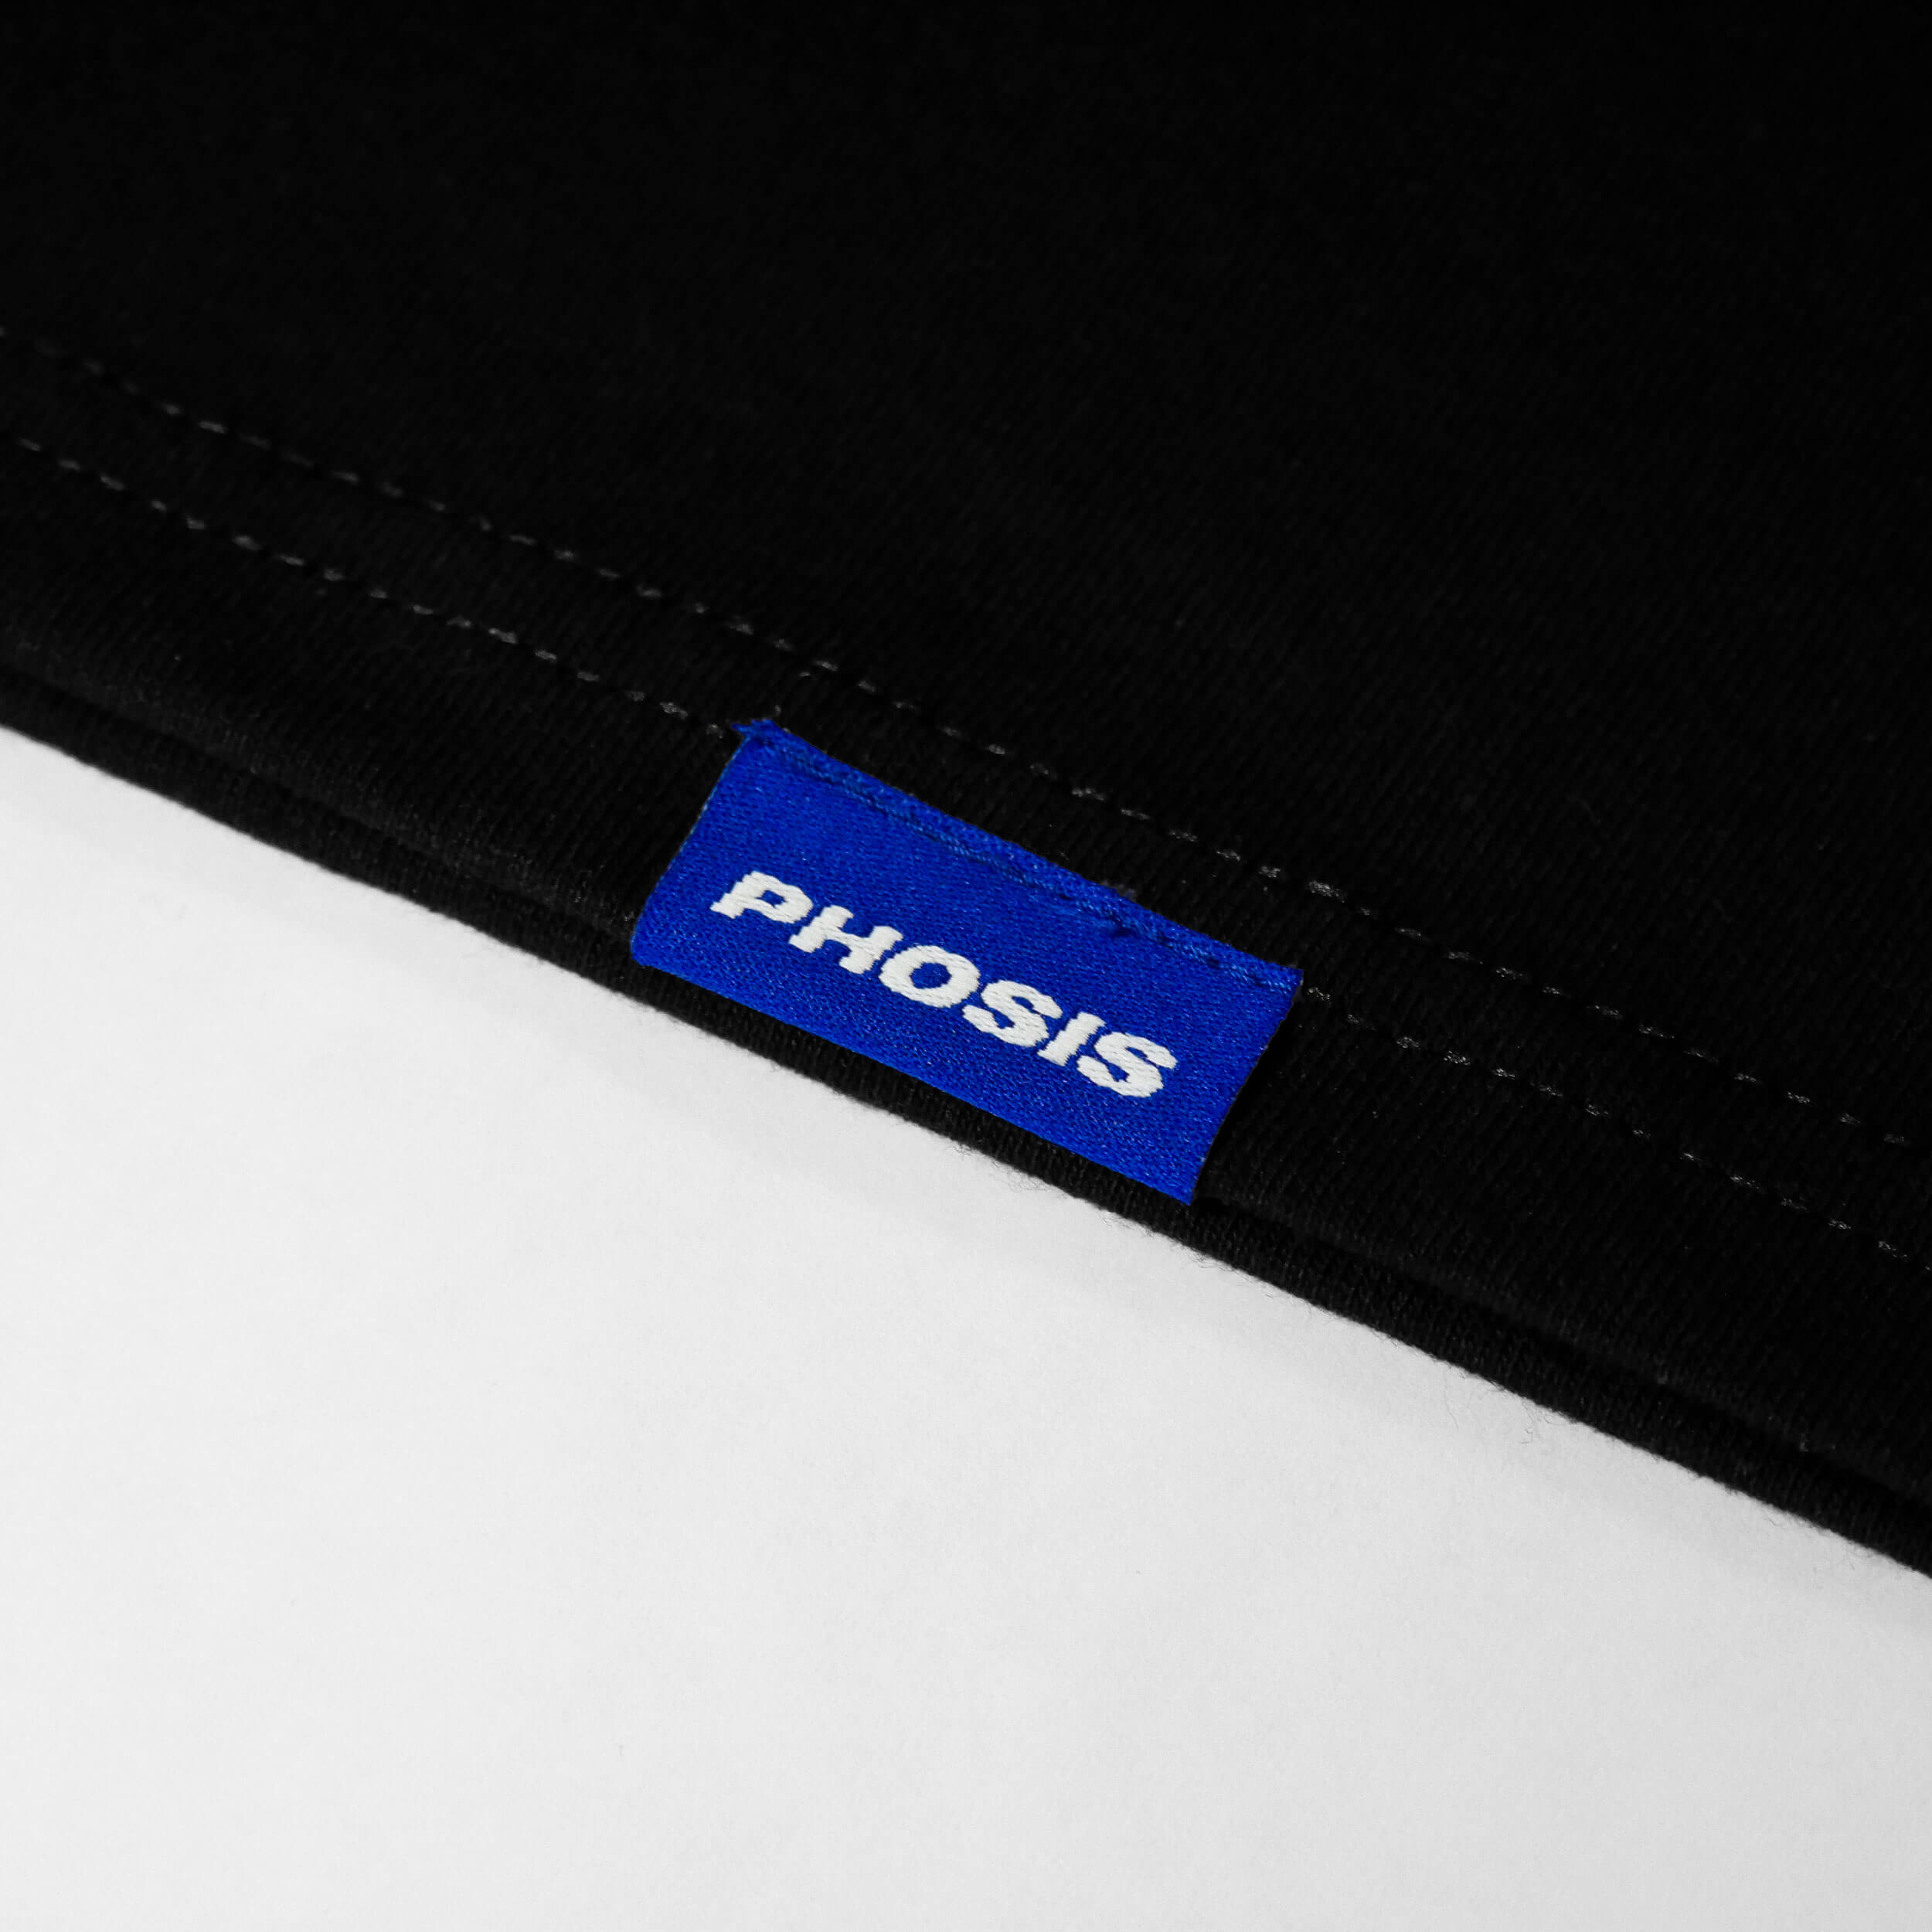 Close up view of the blue woven label in the 'MARIPXSA' BALISONG CLUB black t-shirt from PHOSIS Clothing